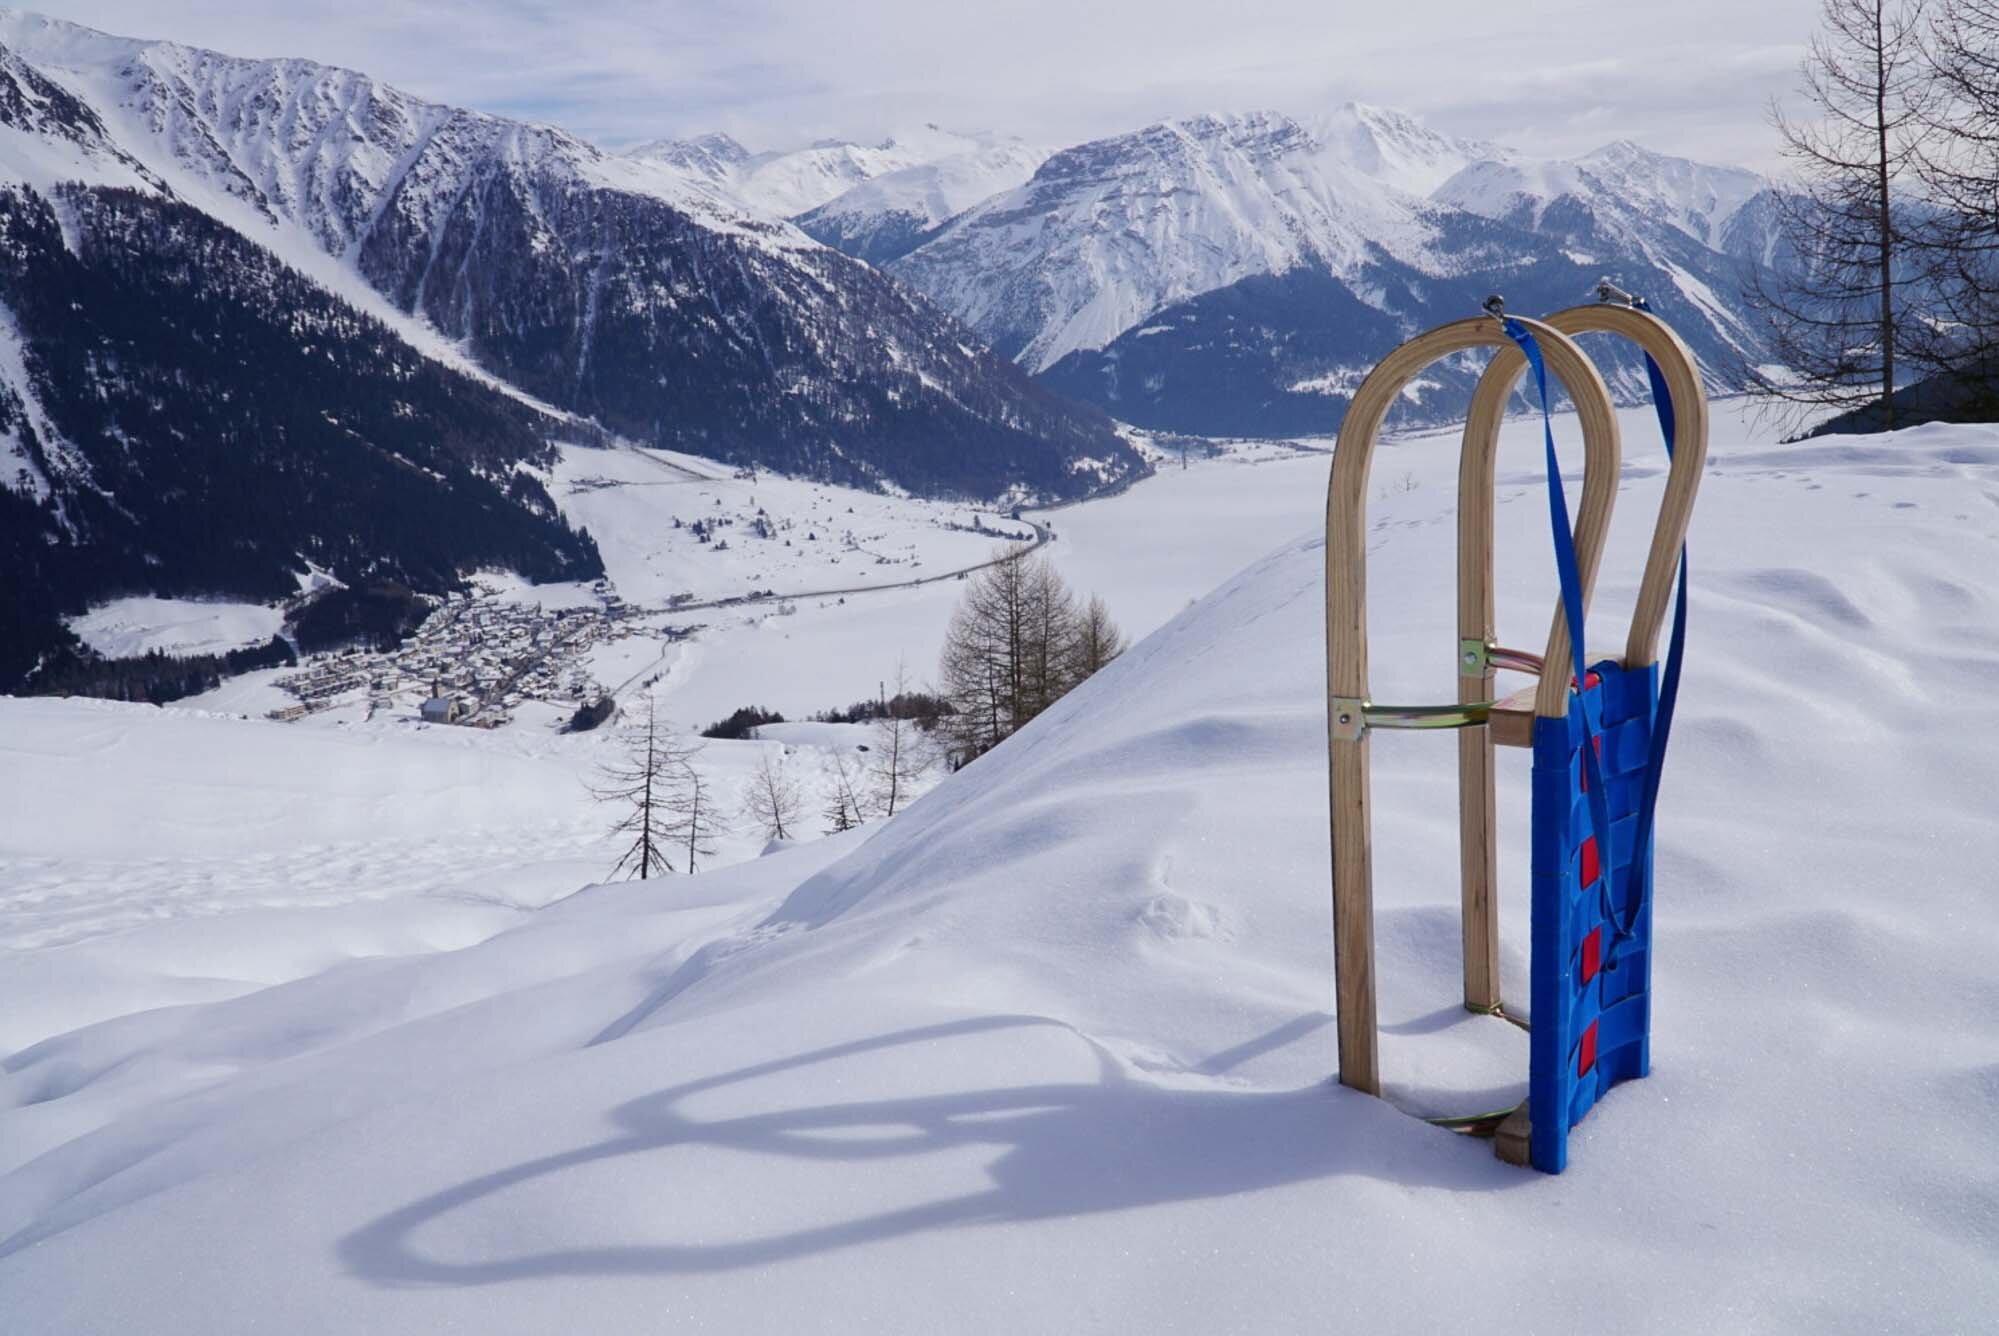 Rodeling: lift-serve sledding and panoramic views